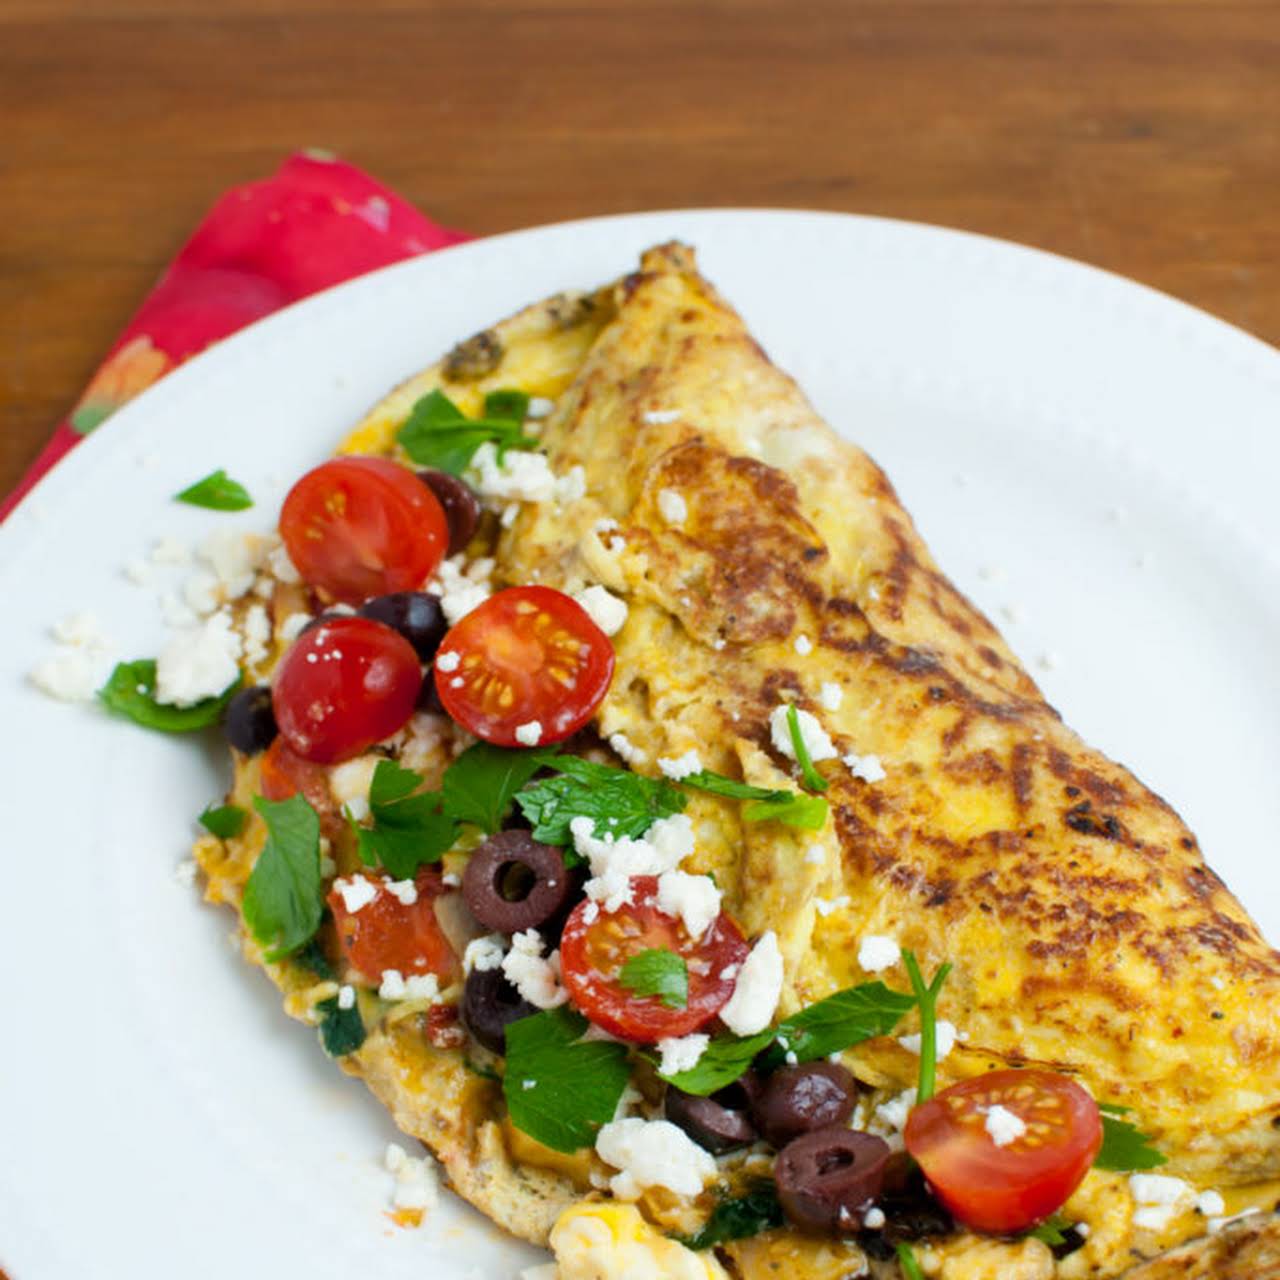 How to Make an Omelet - Kristine's Kitchen